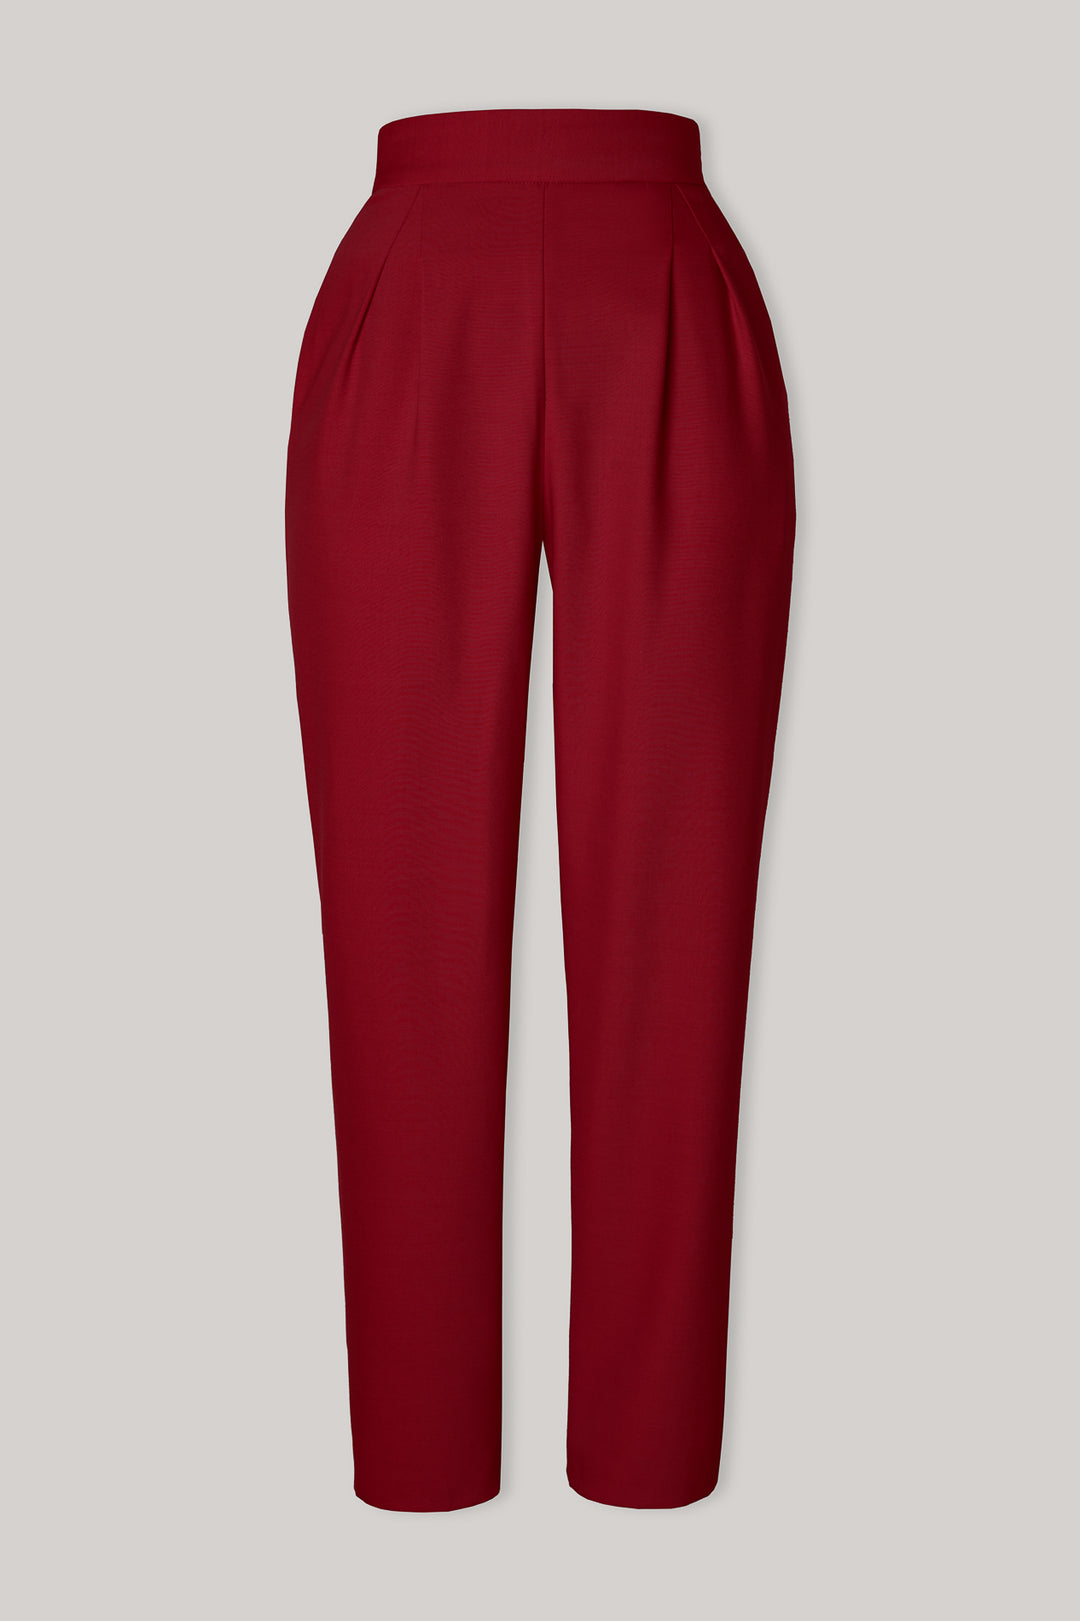 Ruby Red Virgin Wool Structured Conic Pants